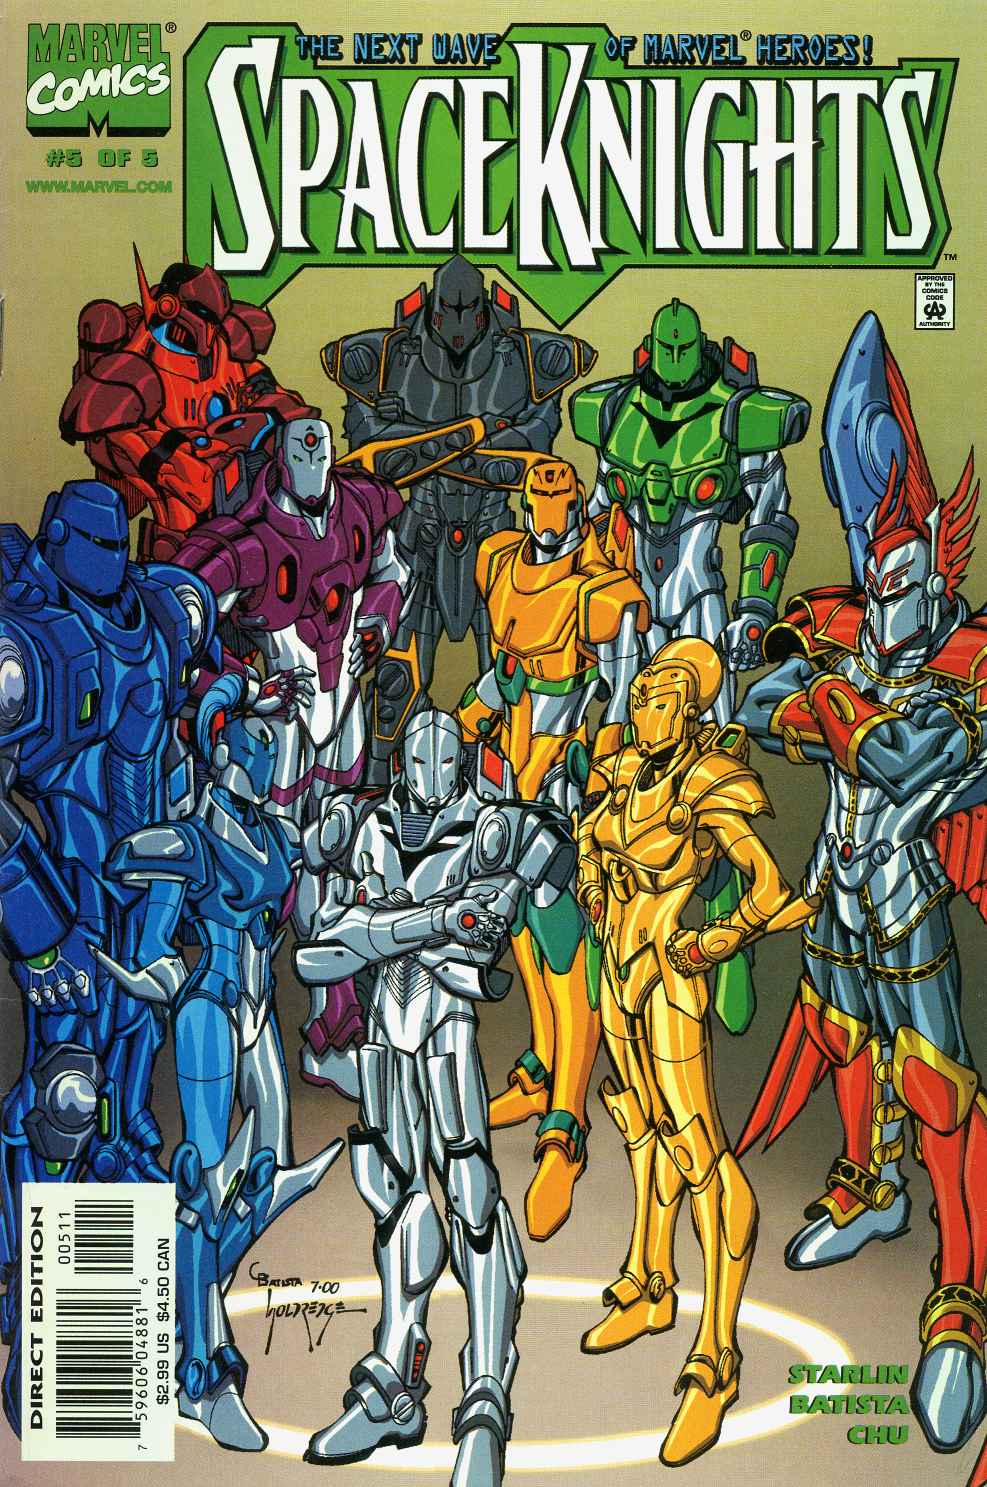 Read online Spaceknights (2000) comic -  Issue #5 - 1